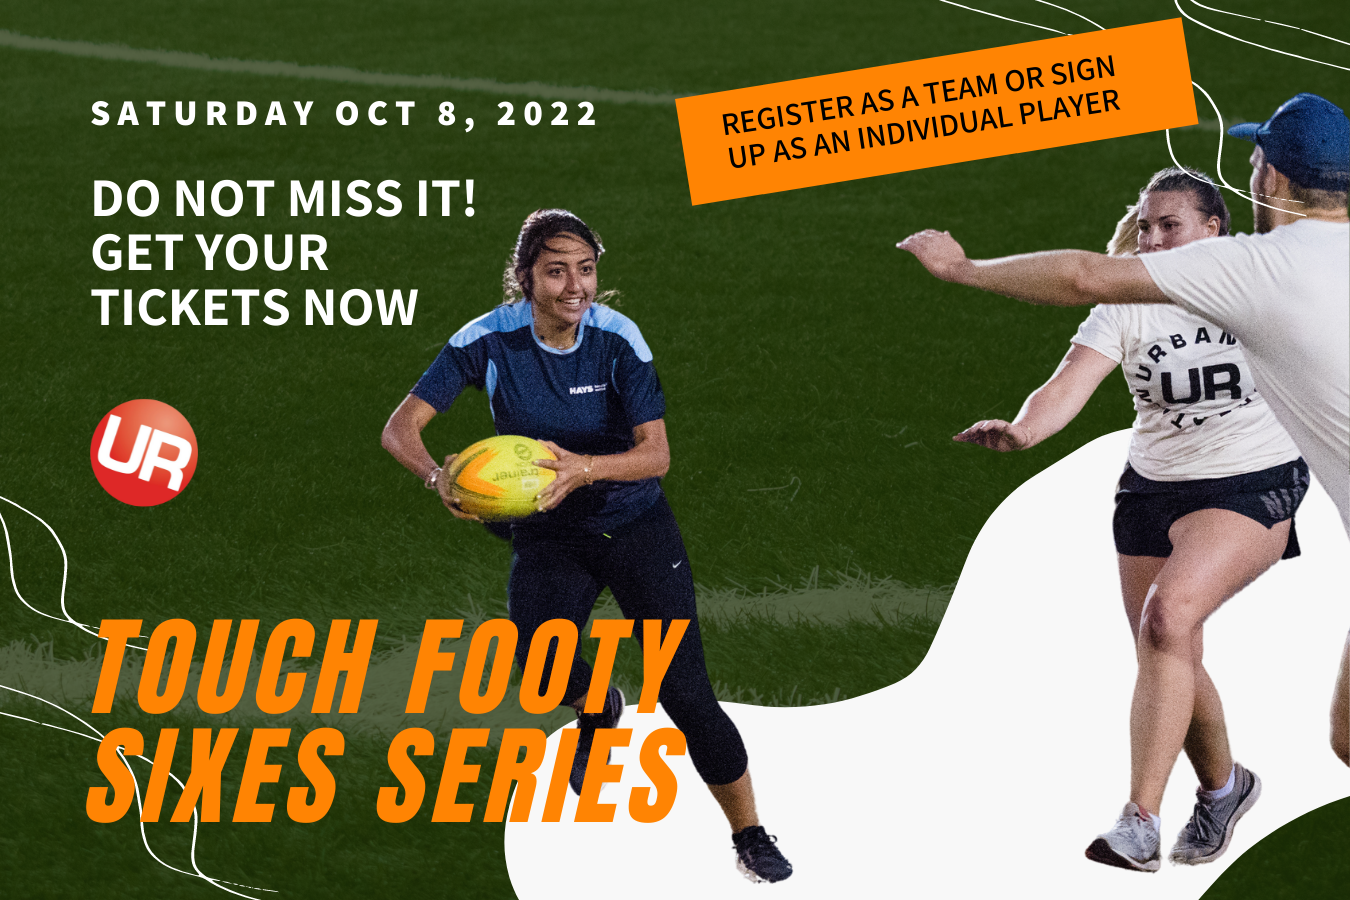 Touch Footy Sixes Series!